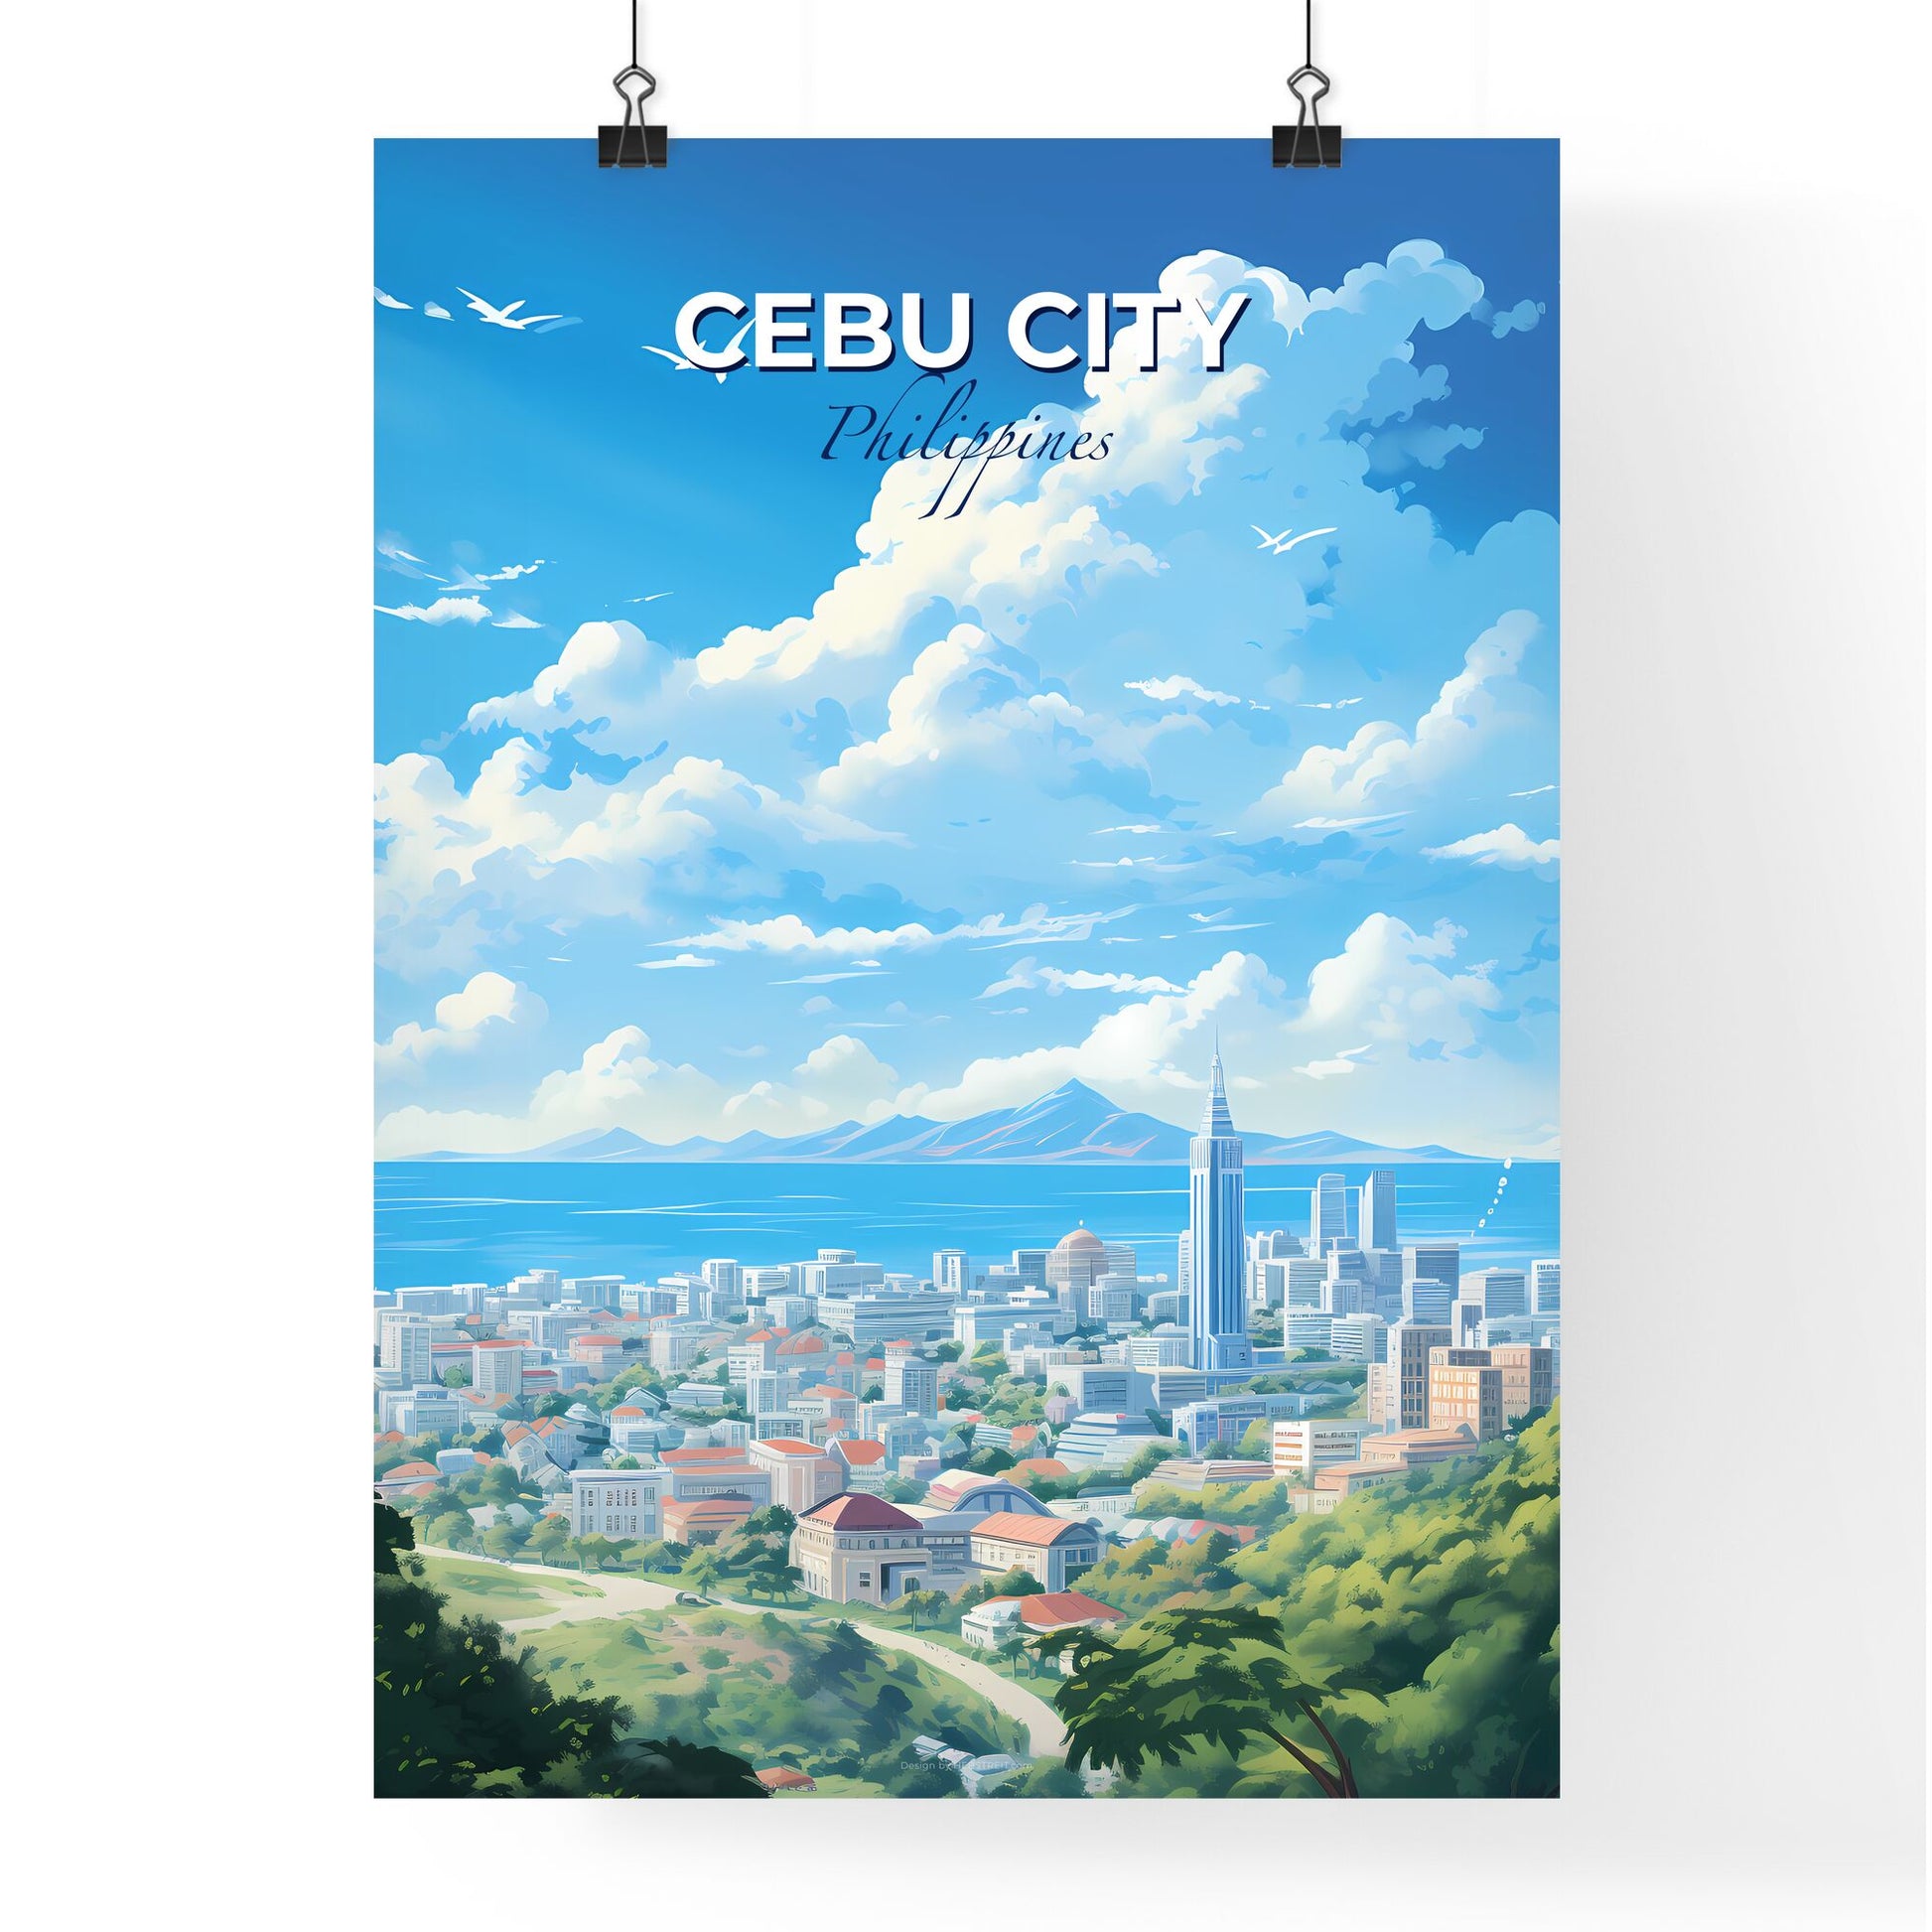 Cebu City Philippines Skyline - A City With A Body Of Water And Birds Flying In The Sky - Customizable Travel Gift Default Title